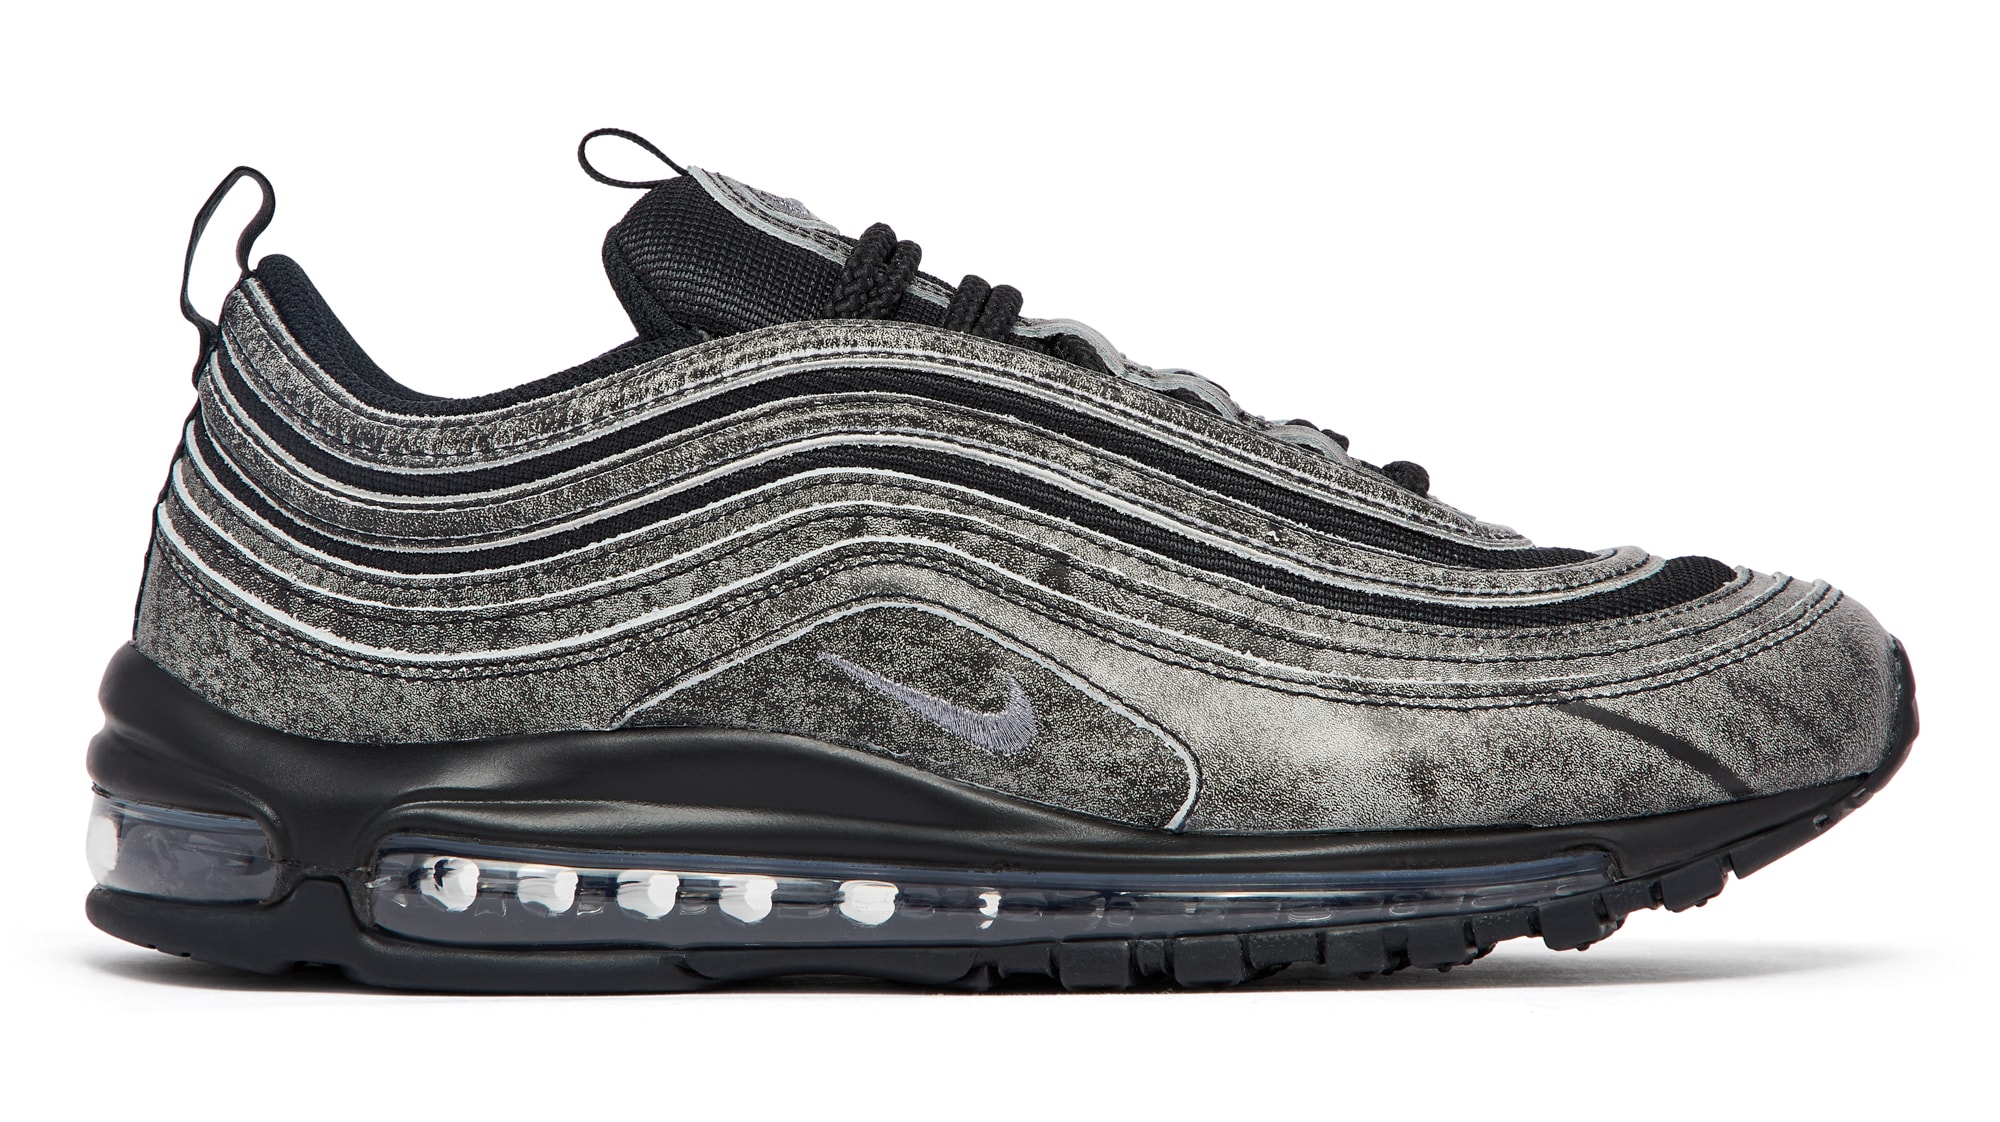 Comme Des Garcons x Nike Air Max 97 'Black' Lateral